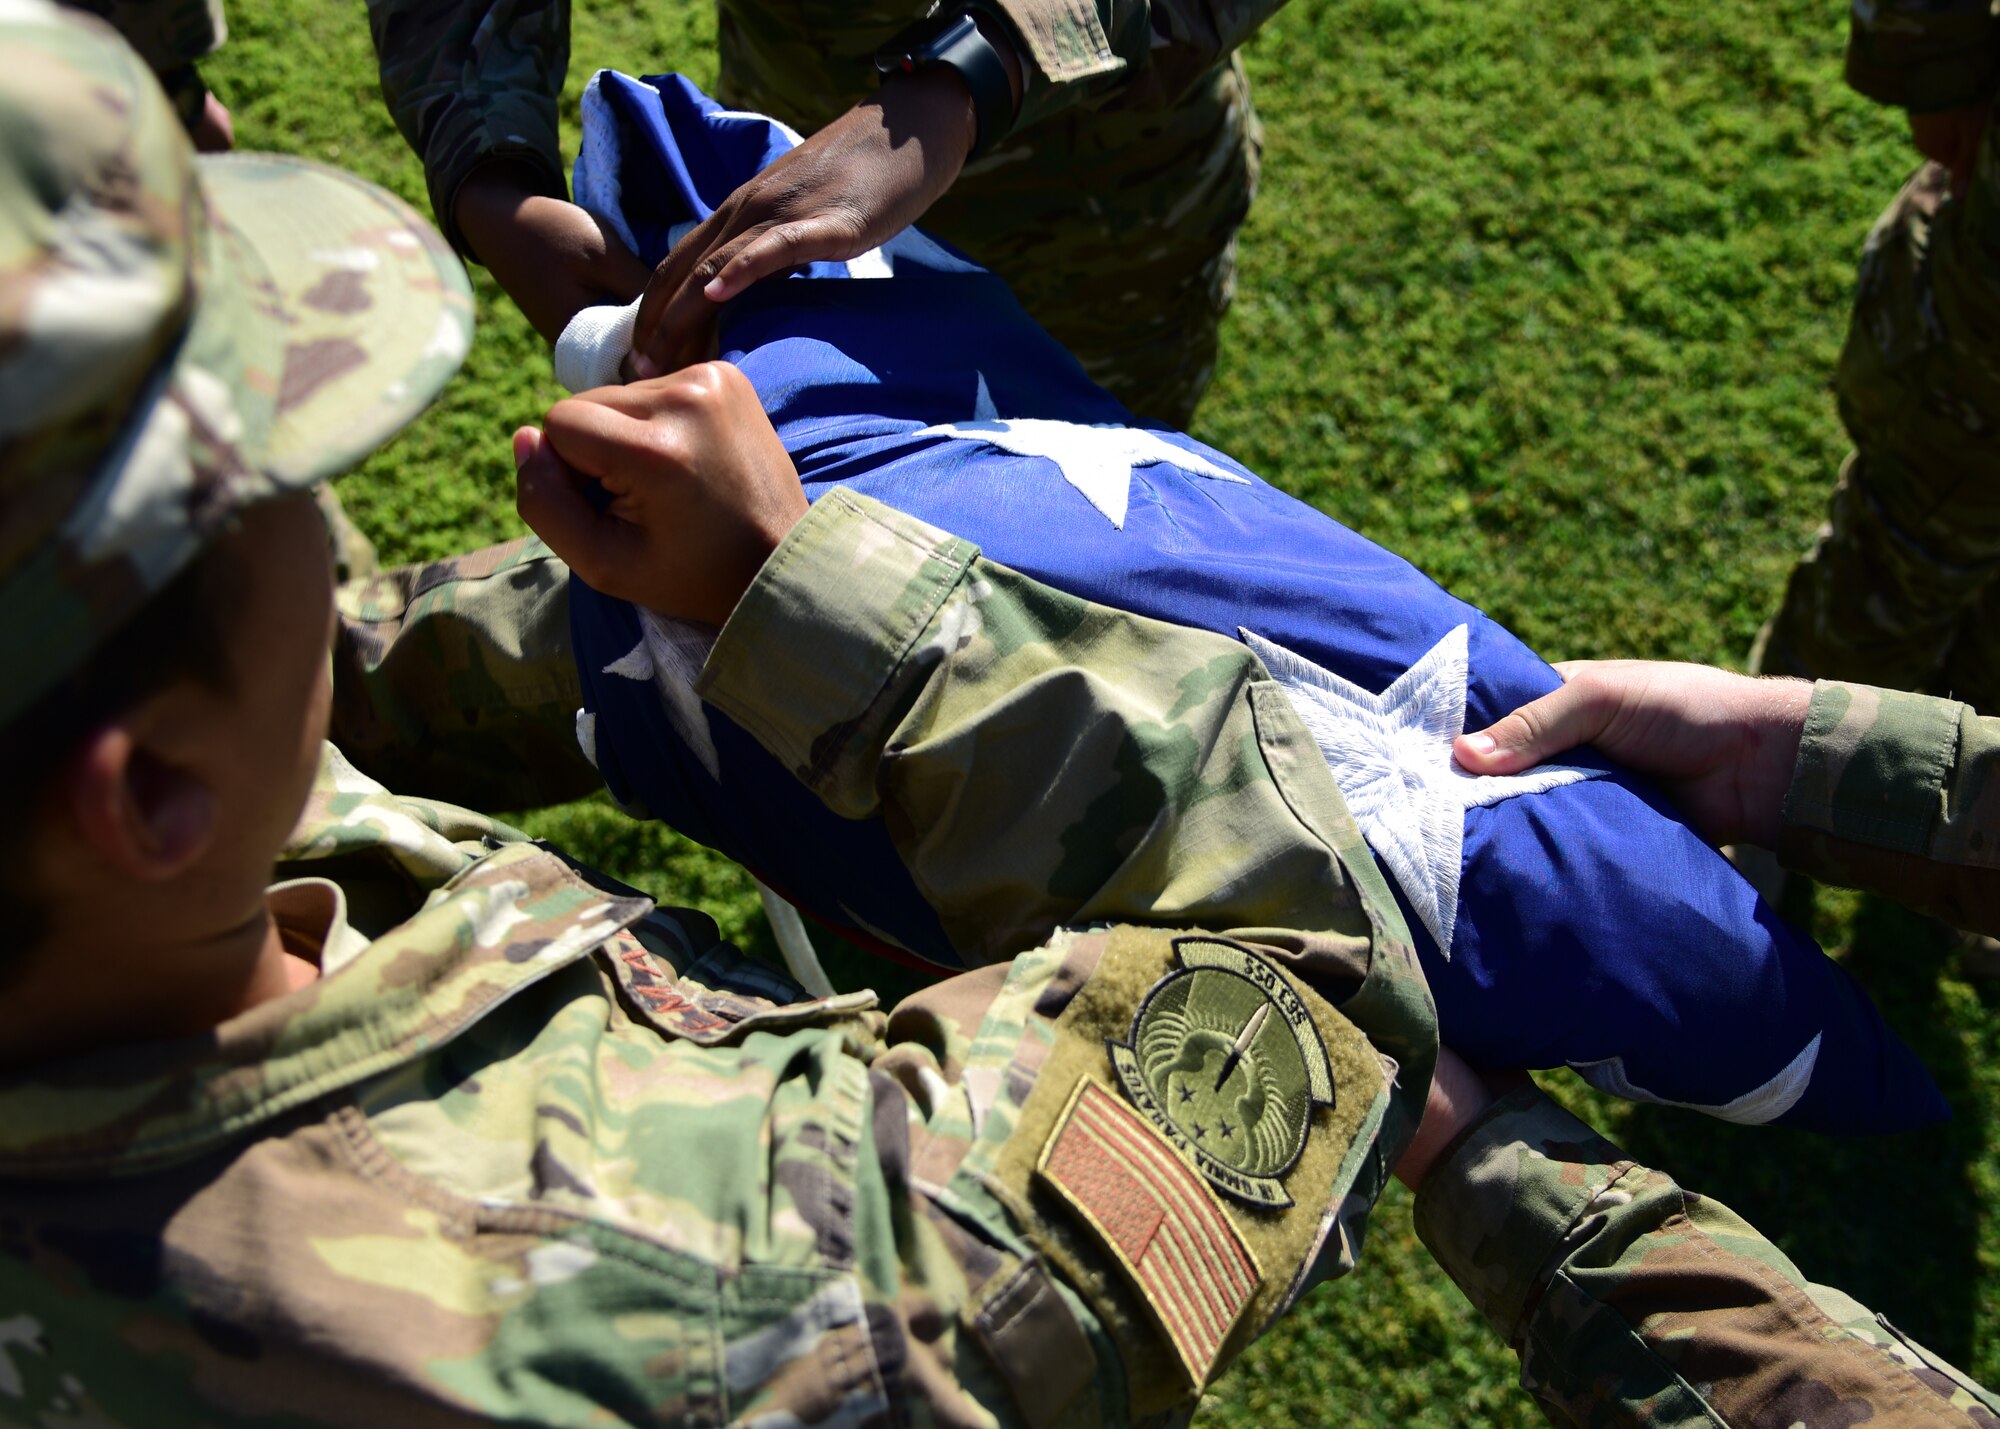 Airmen assigned to the 563d Rescue Group fold the flag during a retreat ceremony at Davis-Monthan Air Force Base, Ariz., June 27, 2019. These Airmen were responsible for the flag detail portion of this ceremony which included lowering and folding the flag.